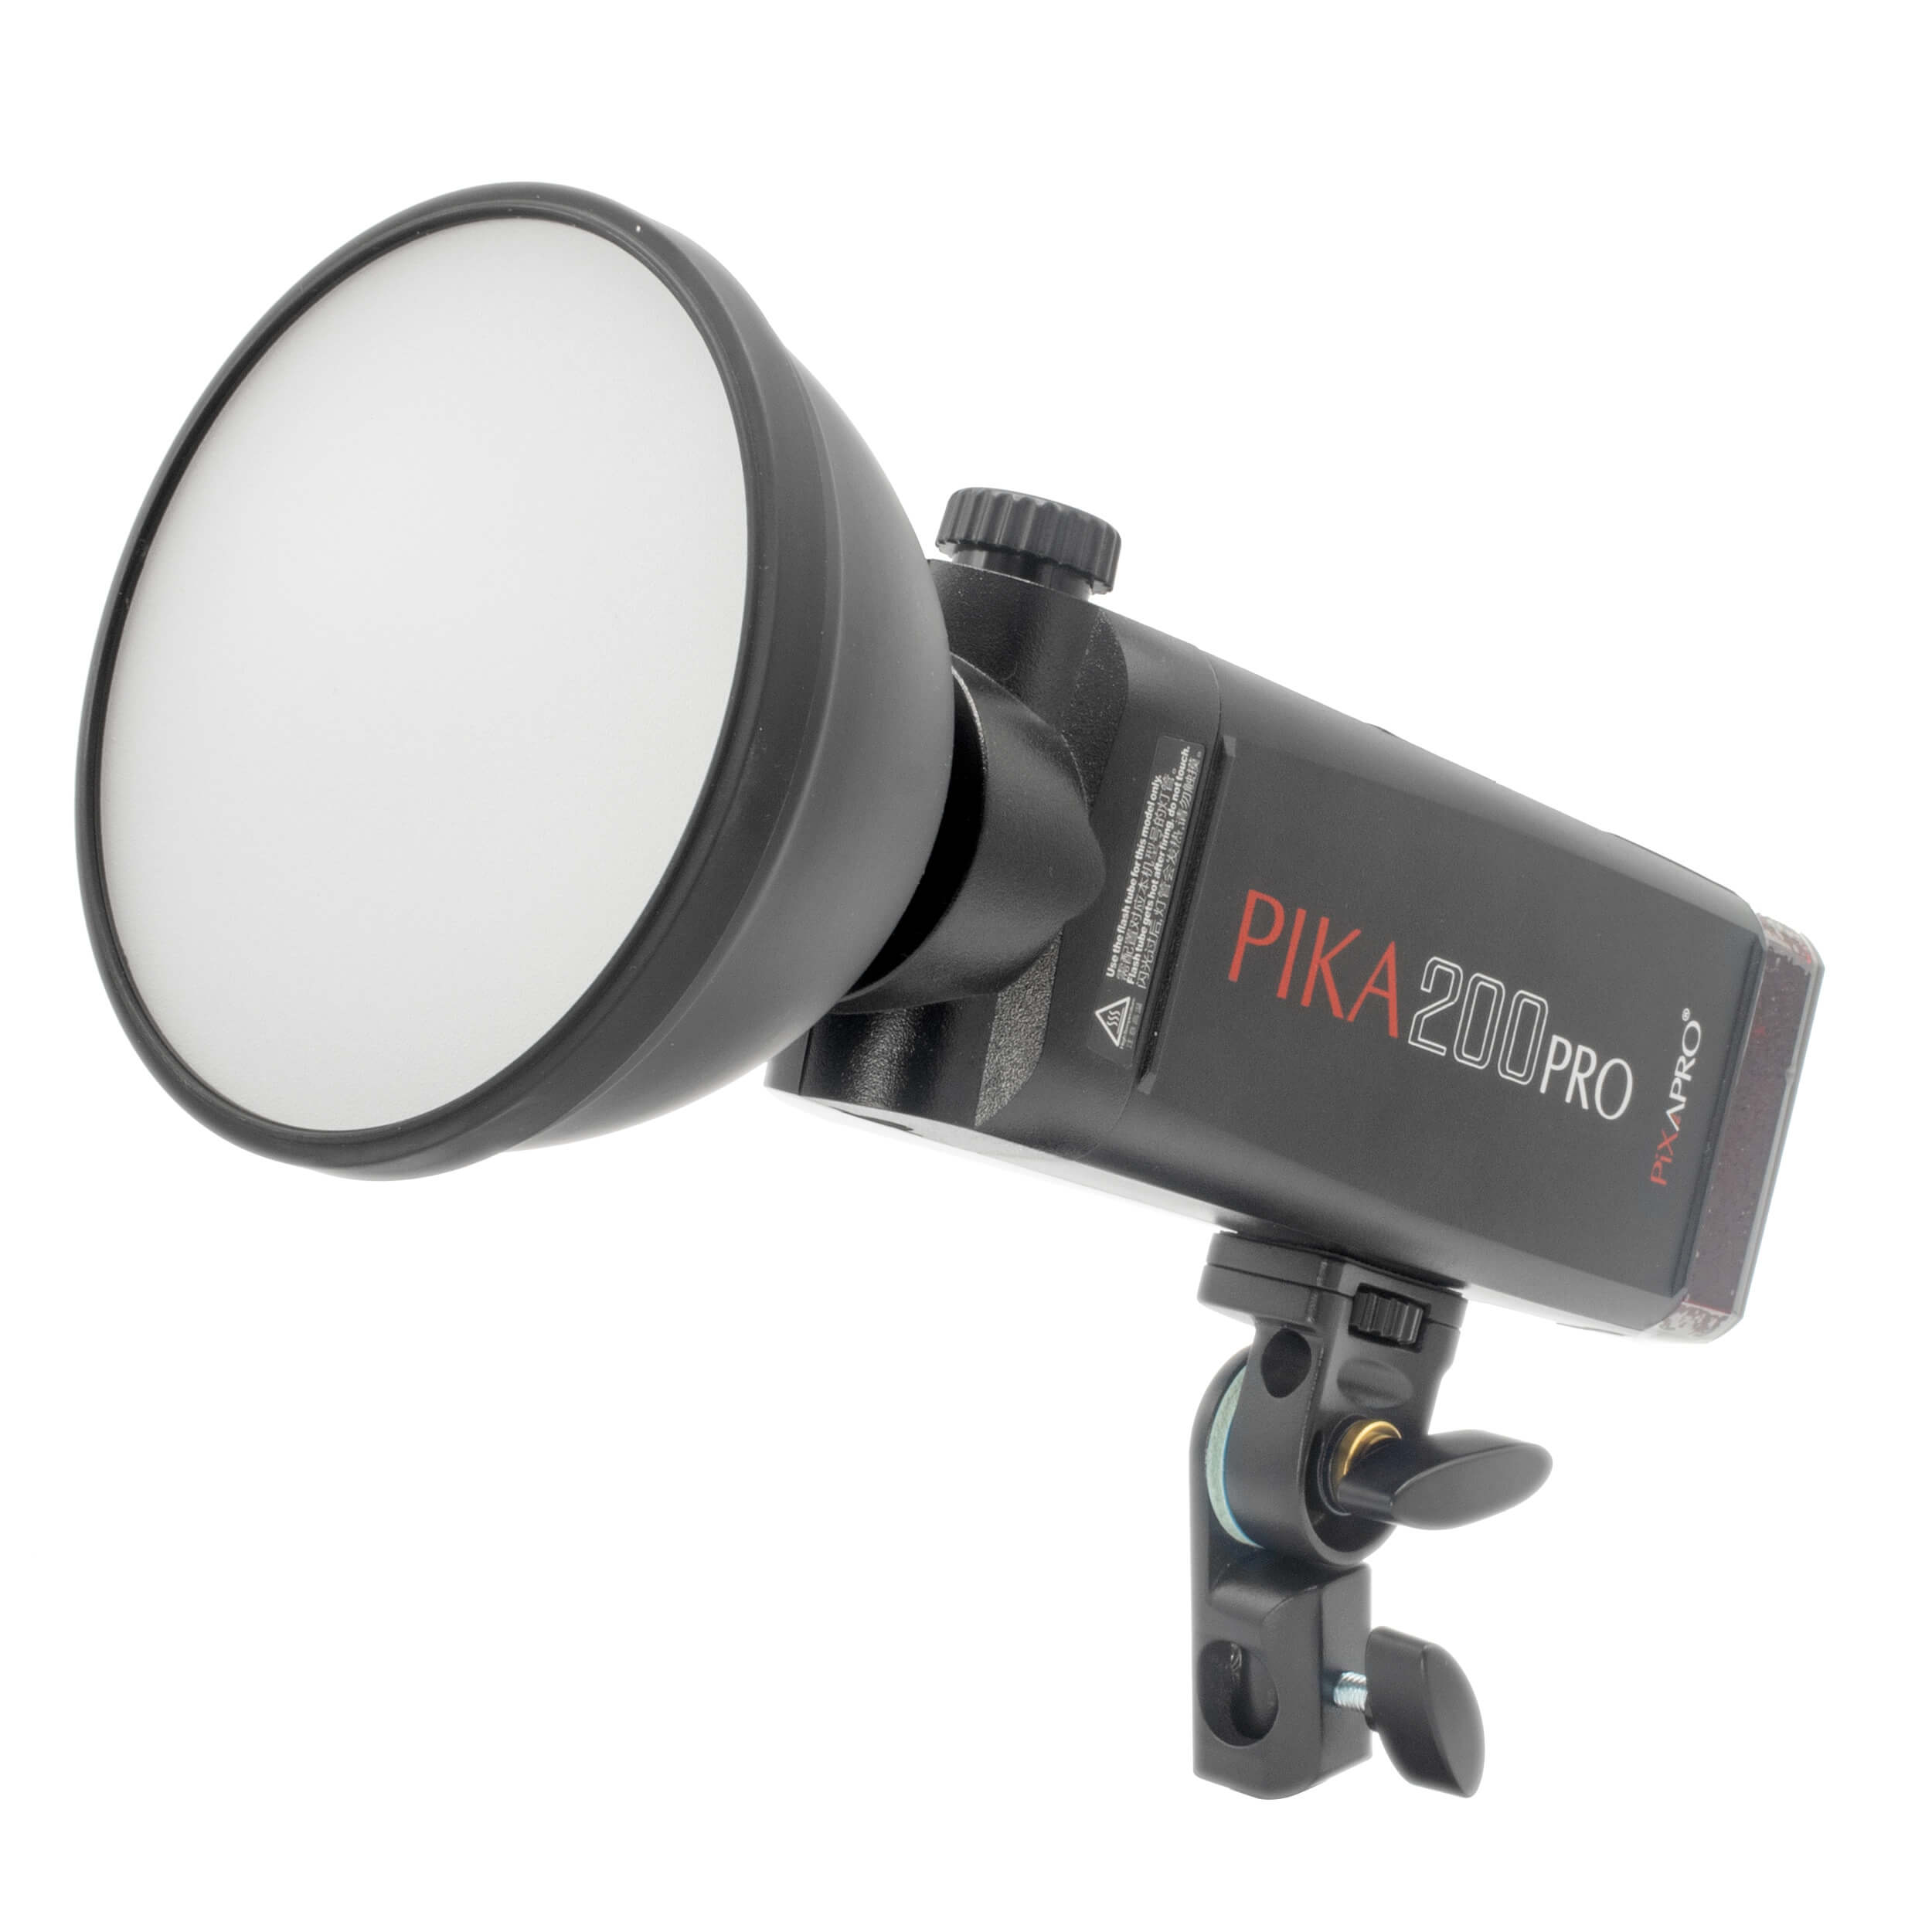 PIKA200Pro Power Flash & Reflector On Location By PixaPro 